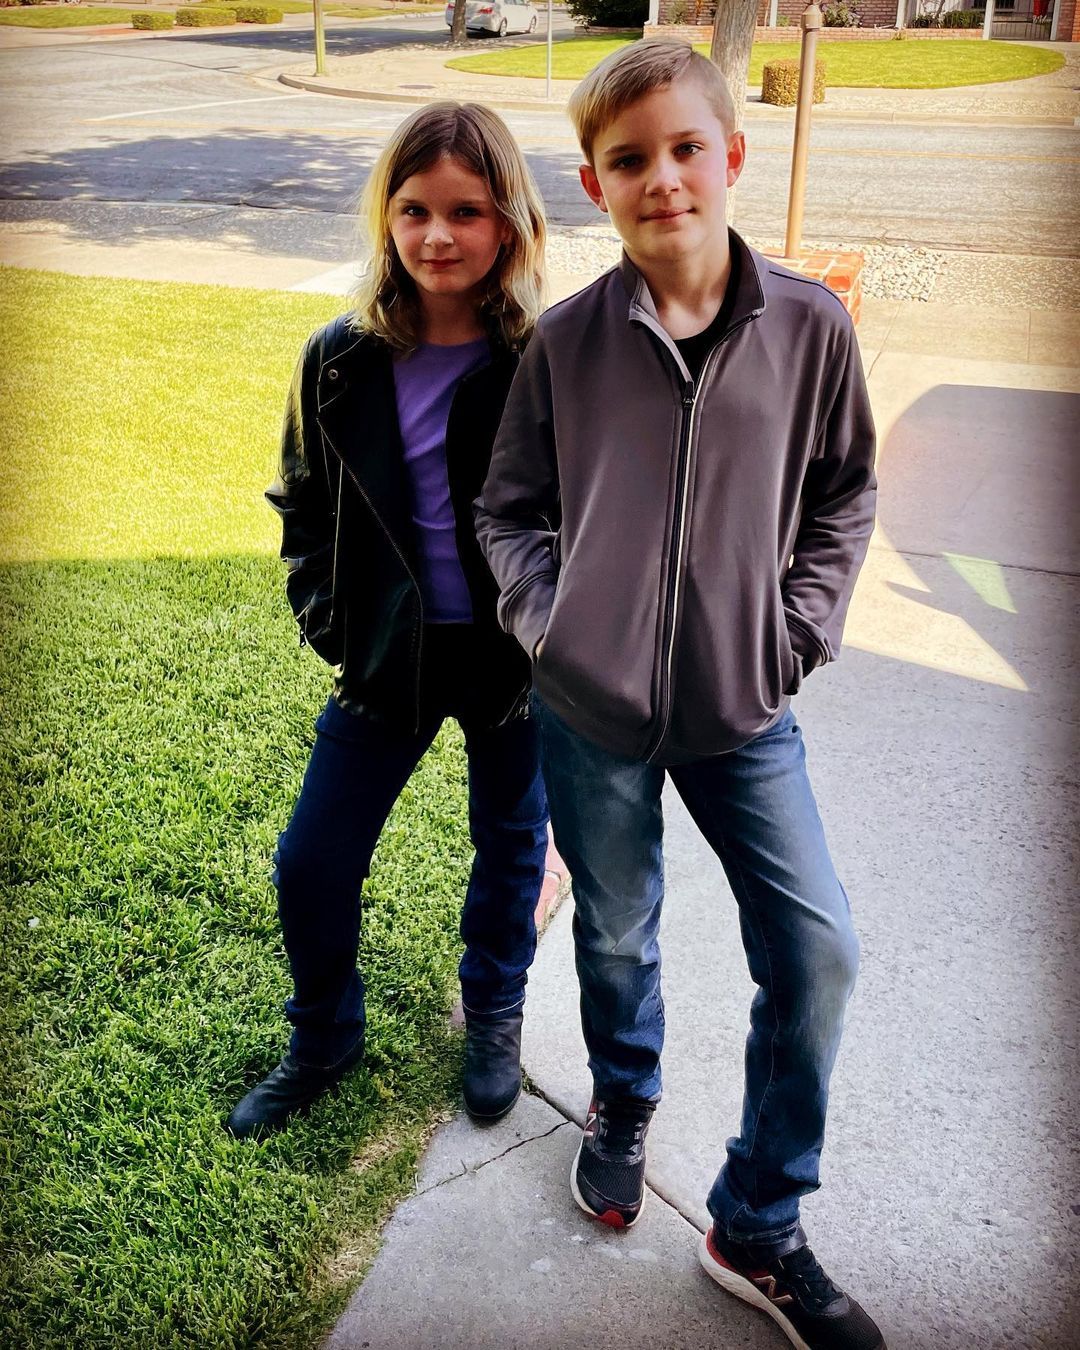 Heading out for a first Saturday night family dinner in this new almost post-COVID life. How did these kiddos get so big? And cool?? I had two littles when lockdown started and now they are preteens!
A lovely meal was had, thank you @bsbwillowglen -...